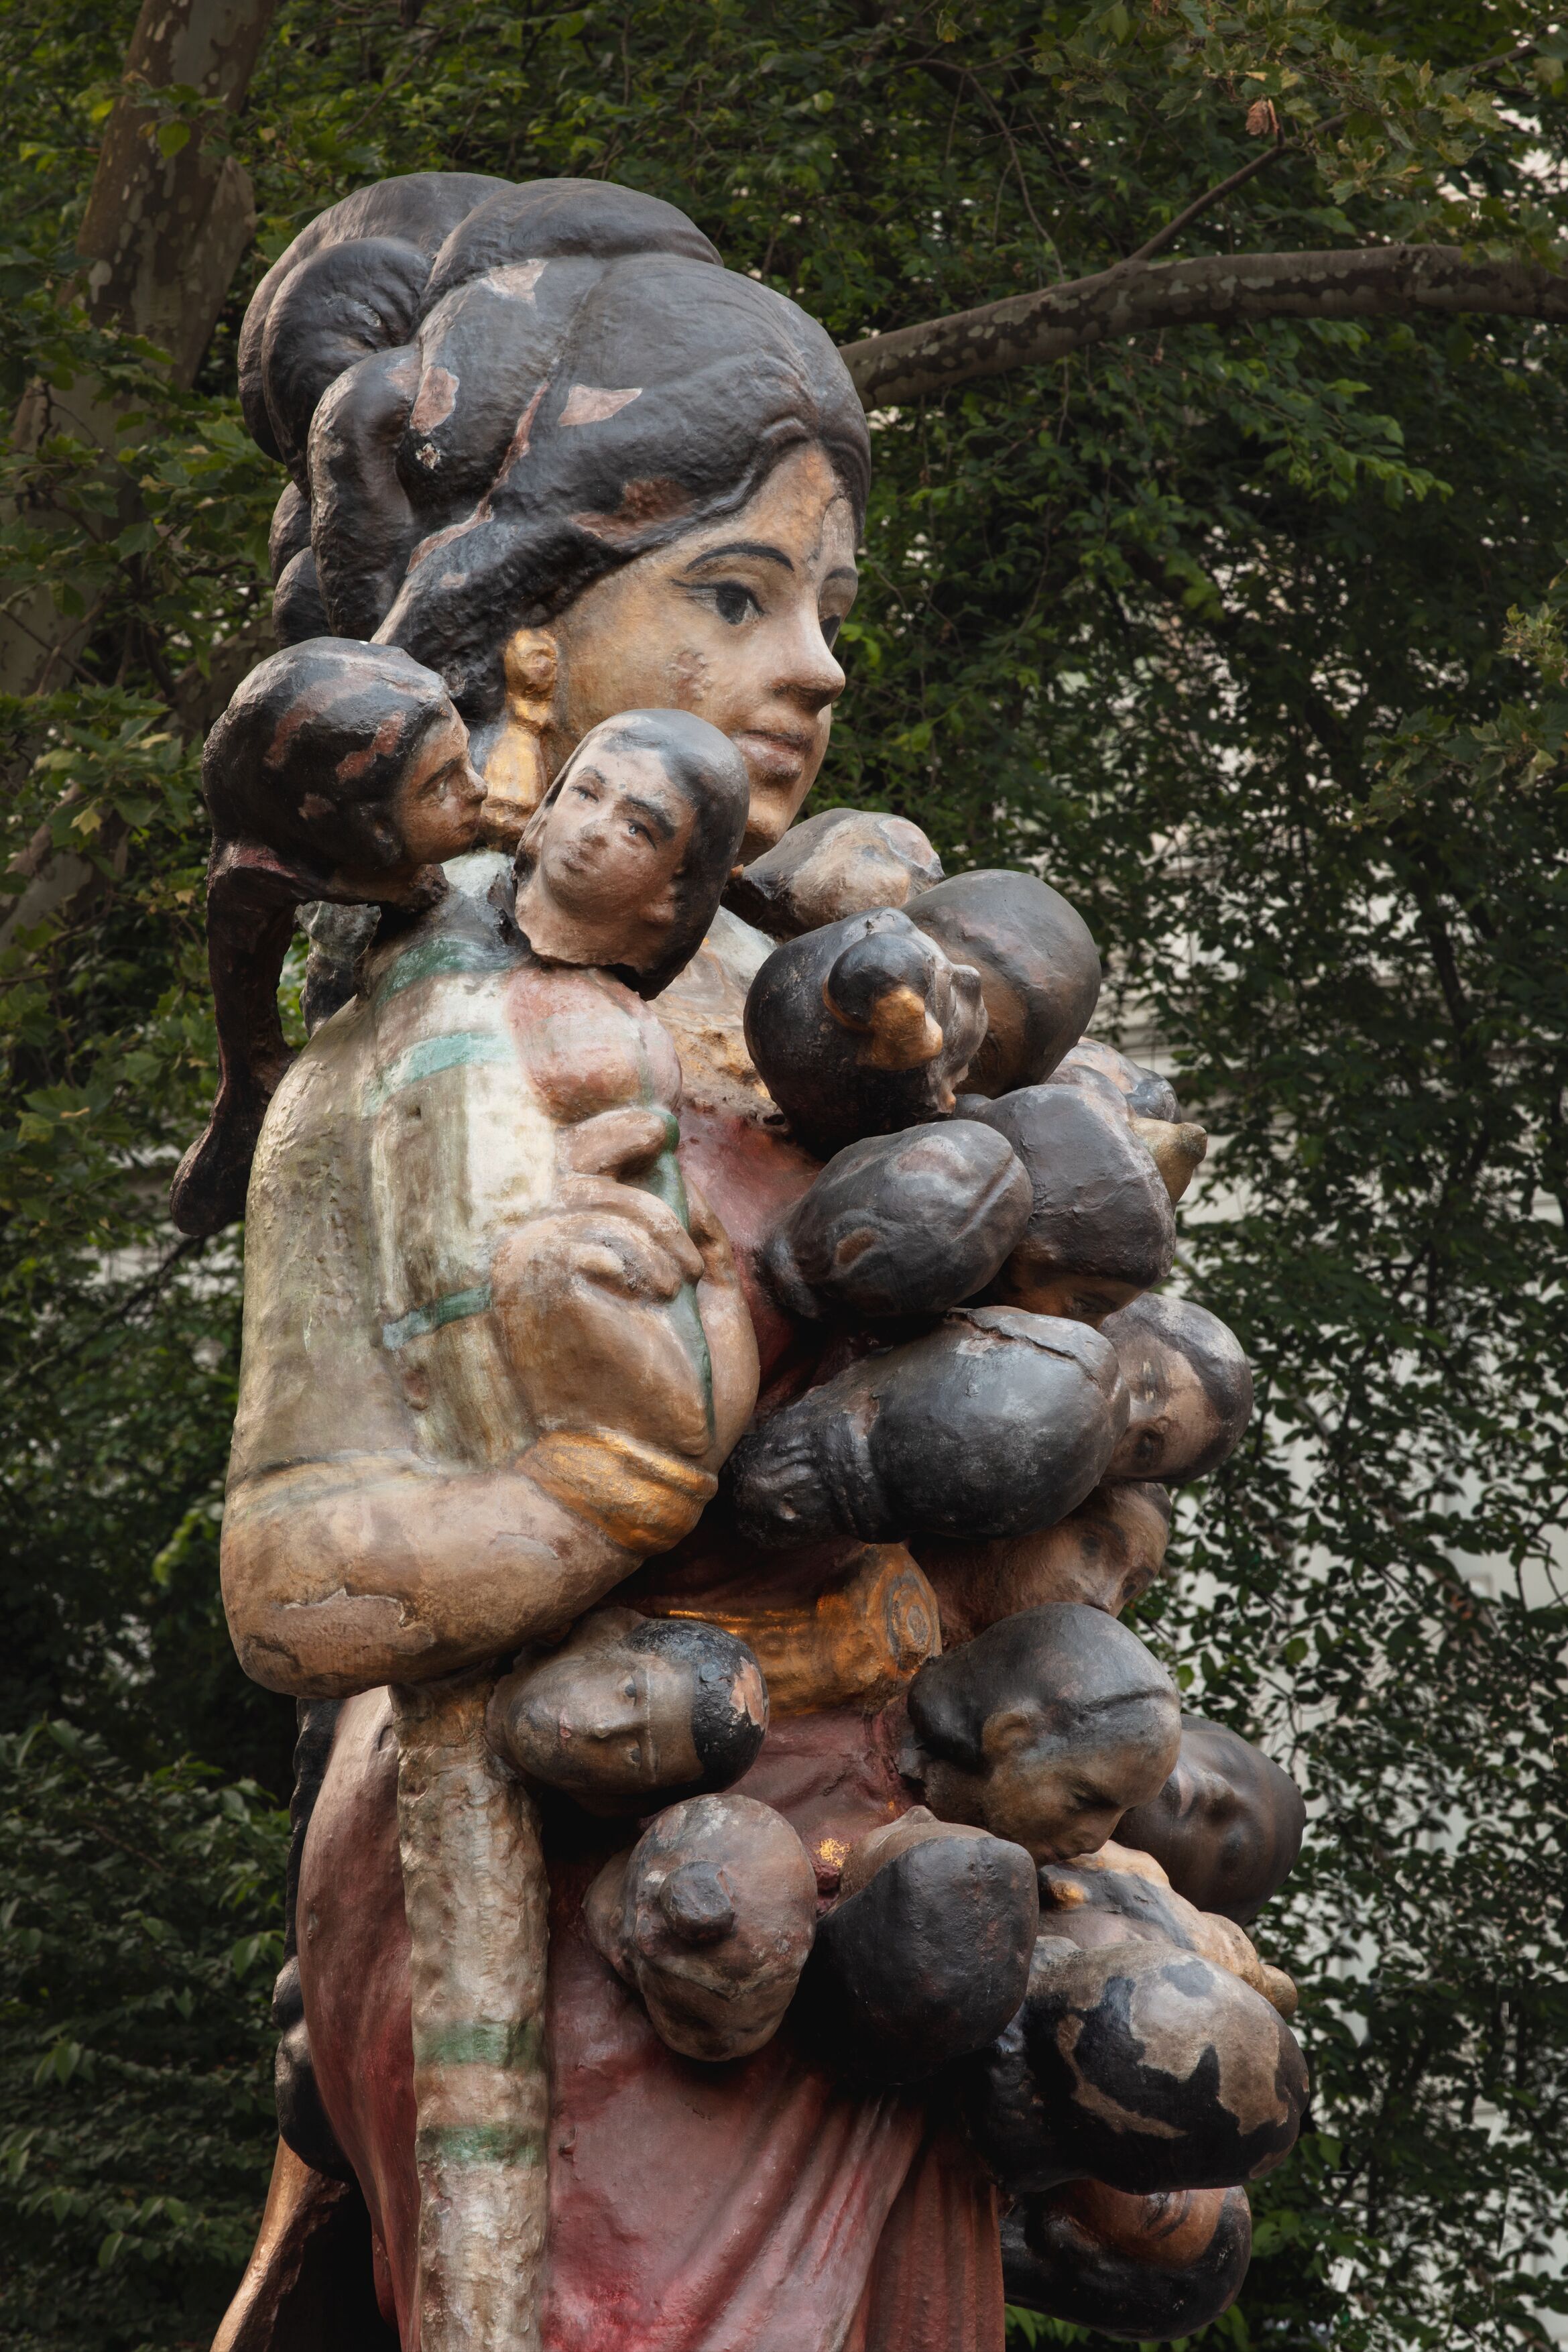 Sculpture of a female figure with multiple heads attached down her torso.